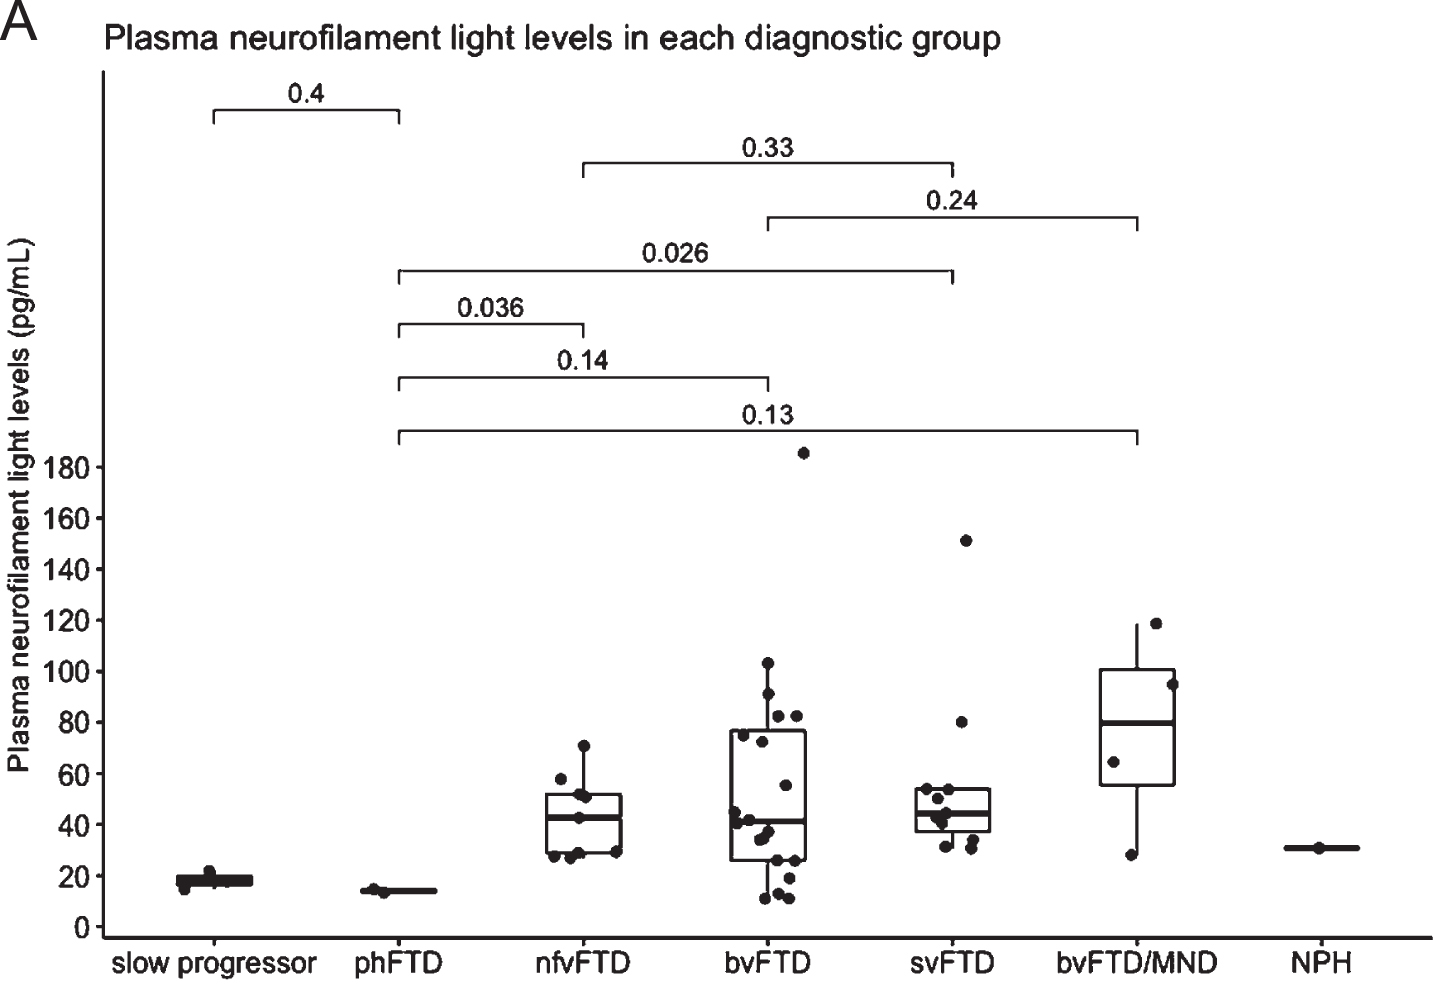 A) Plasma neurofilament light in each diagnostic group. Median NfL is represented in the boxplot by the thick line. The 1st and 3rd quartiles are represented by the hinges. The lower and upper whiskers indicate the smallest and largest NfL value that are 1.5 times the interquartile range, respectively. NfL values beyond the end of the whiskers are plotted individually. P values using the Wilcoxon rank sum test between the median NfL for phFTD and each diagnostic group is shown. slow progressor, slowly progressive bvFTD; phFTD, frontotemporal dementia phenocopy; nfvFTD, non-fluent variant frontotemporal dementia; bvFTD, behavioral variant frontotemporal dementia; svFTD, semantic variant frontotemporal dementia; MND, motor neuron disease; NPH, normal pressure hydrocephalus.